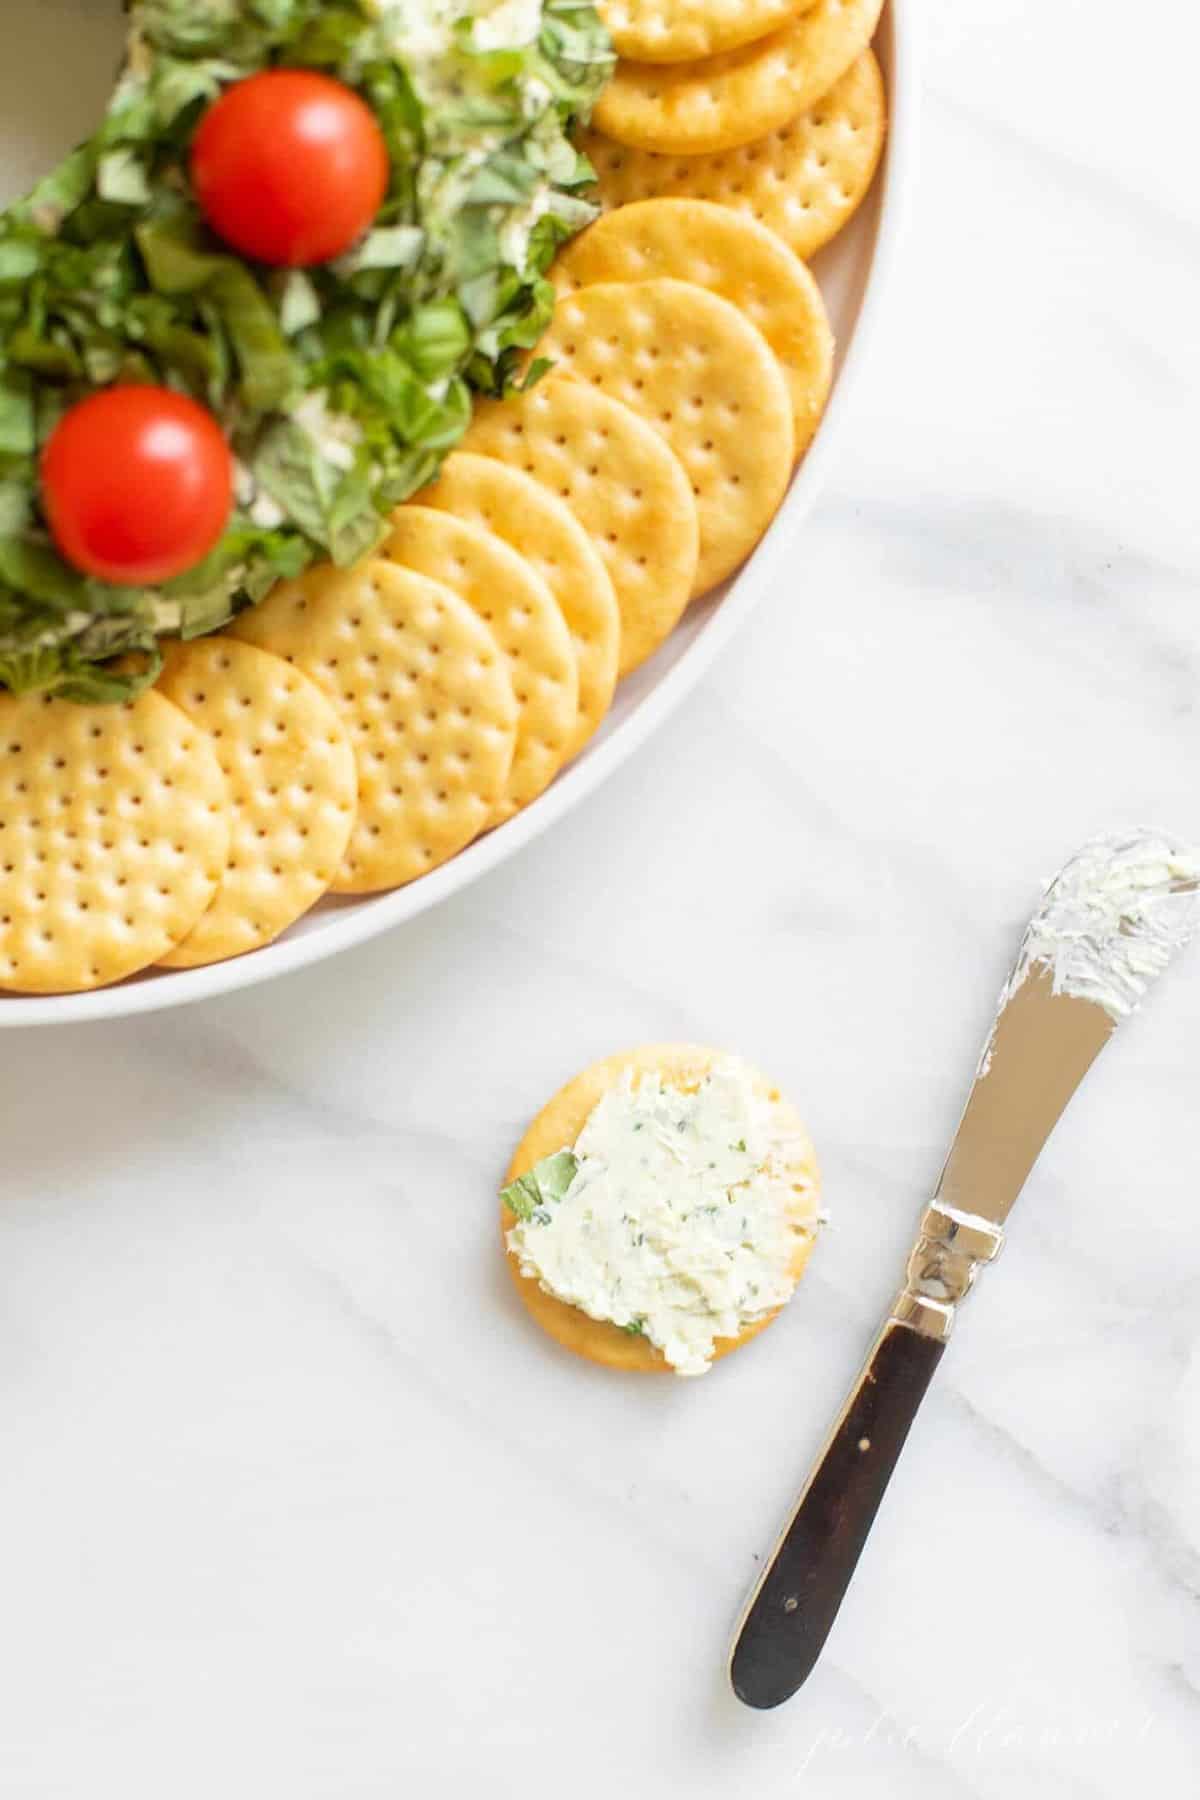 Edge of a platter with a pesto cheese appetizer, crackers surrounding. Single cracker with cheese on top and knife to the side.